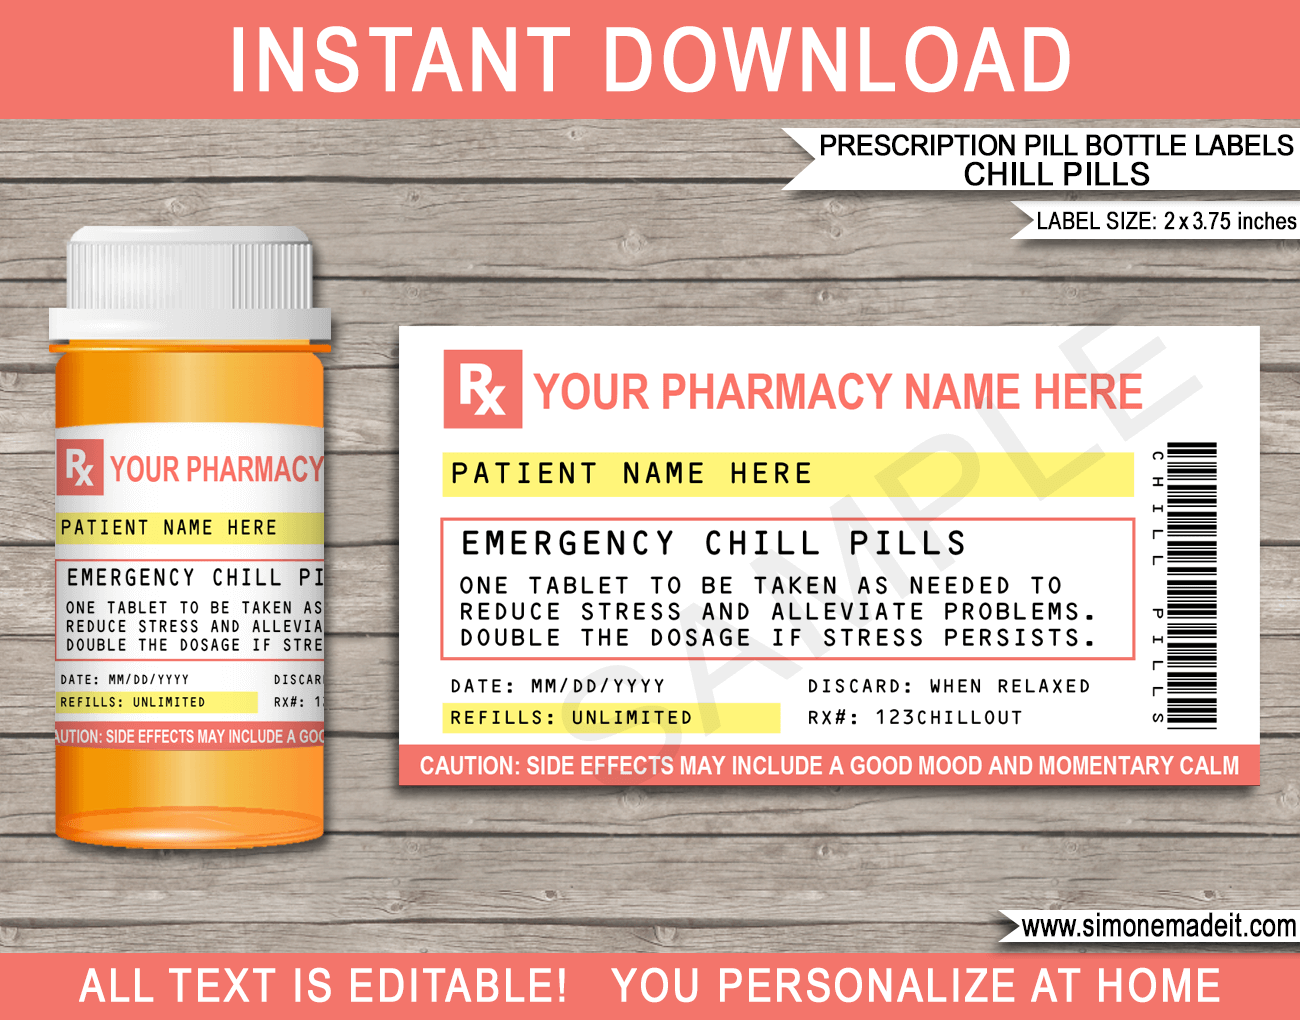 Printable Pill Bottle Label Template Free